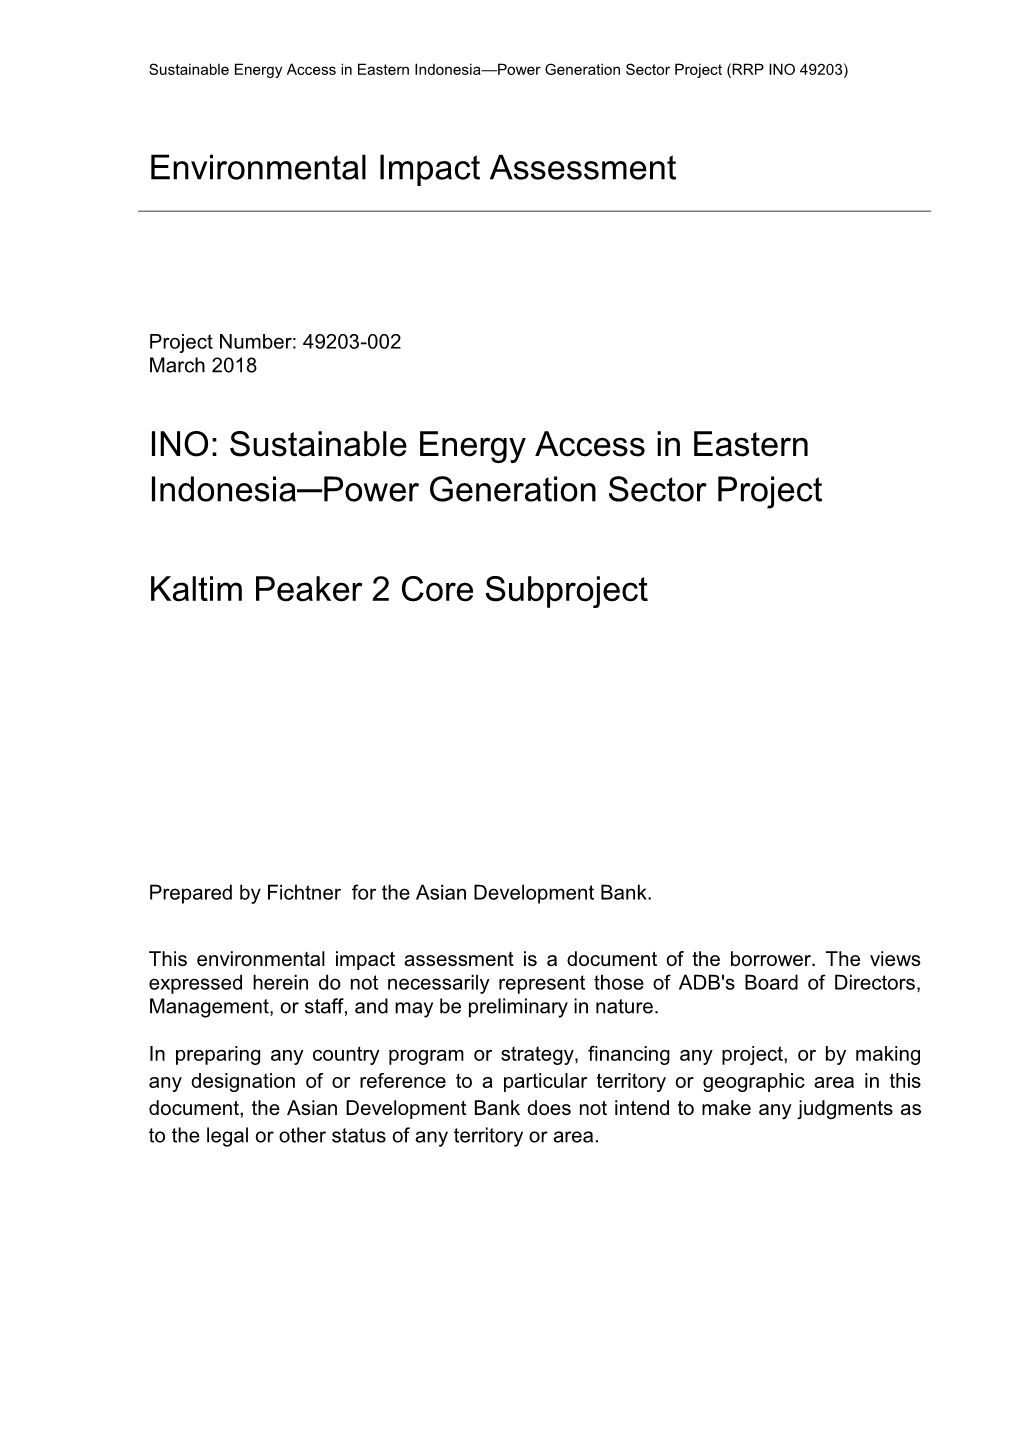 Sustainable Energy Access in Eastern Indonesia Power Generation